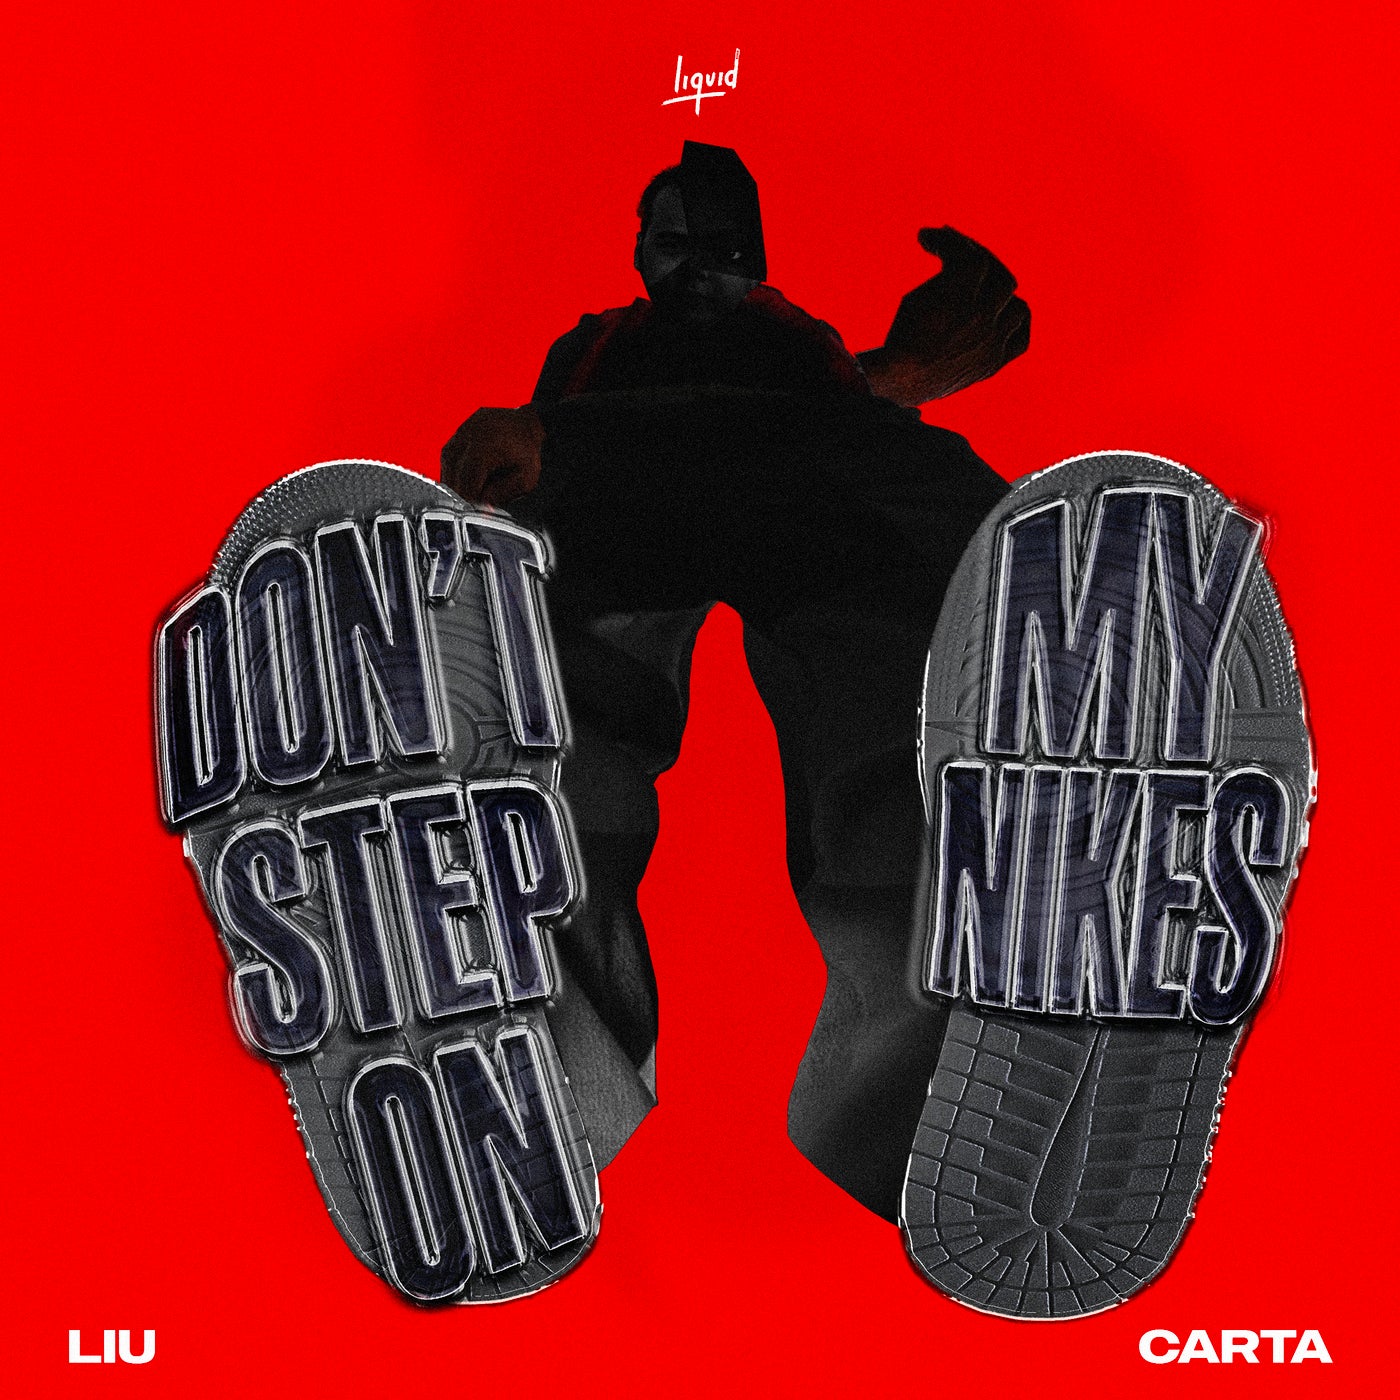 Don't Step On My Nikes